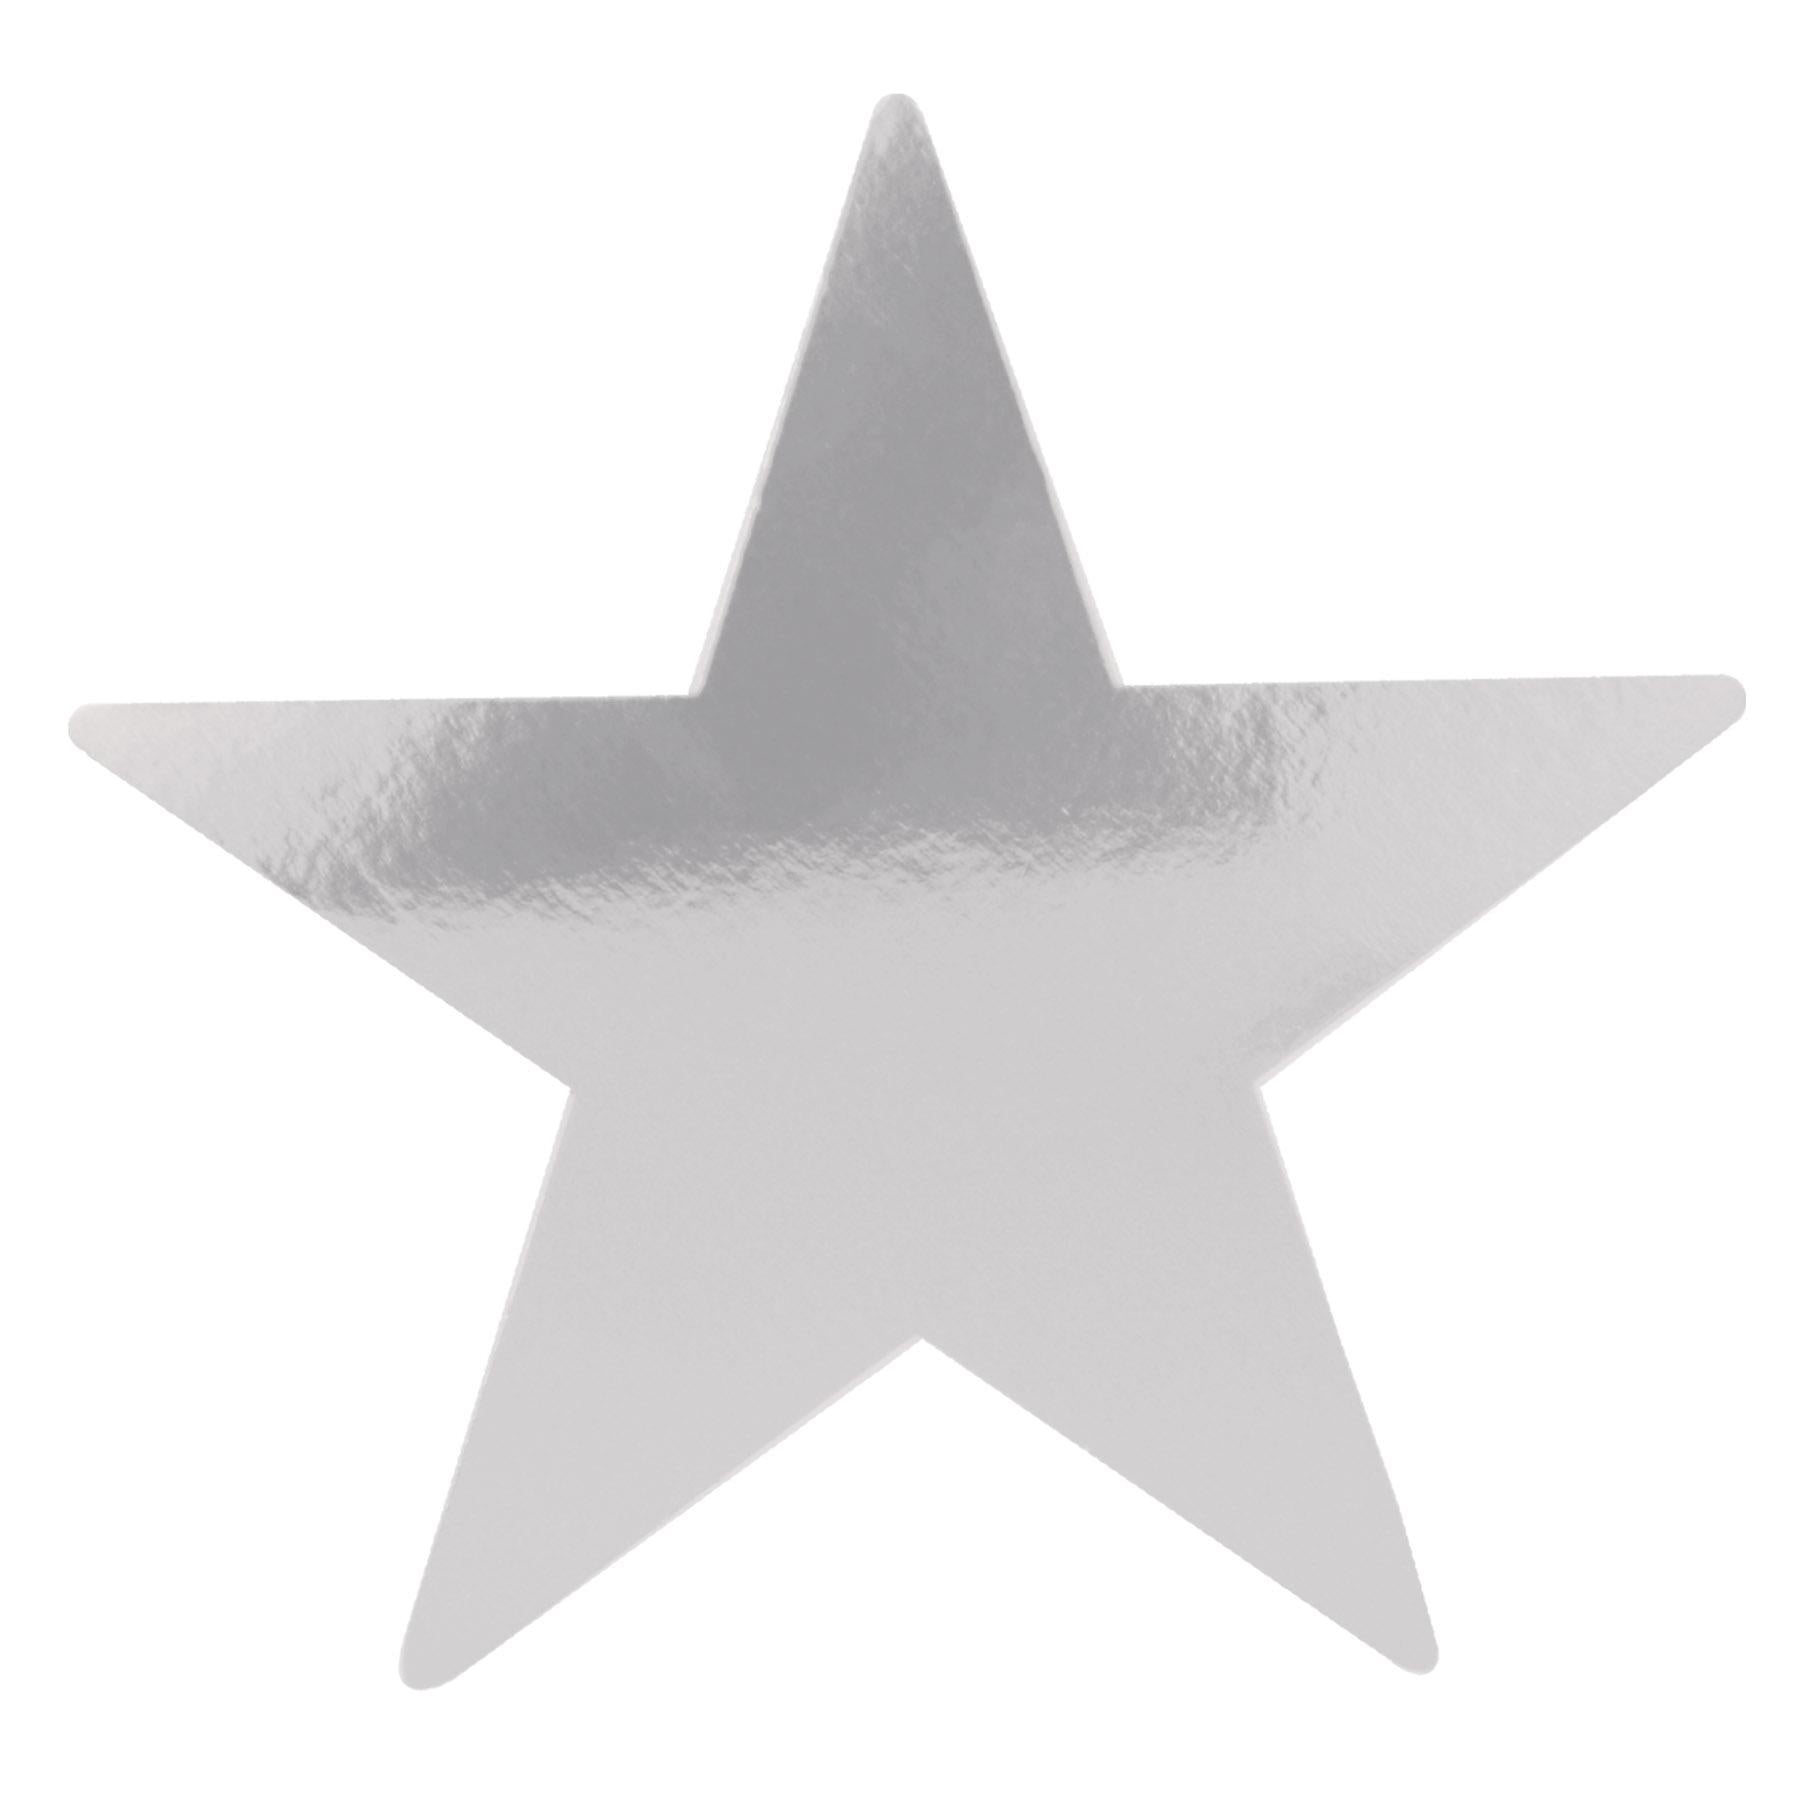 15 Inch Beistle Foil Star Party Cutout- Silver